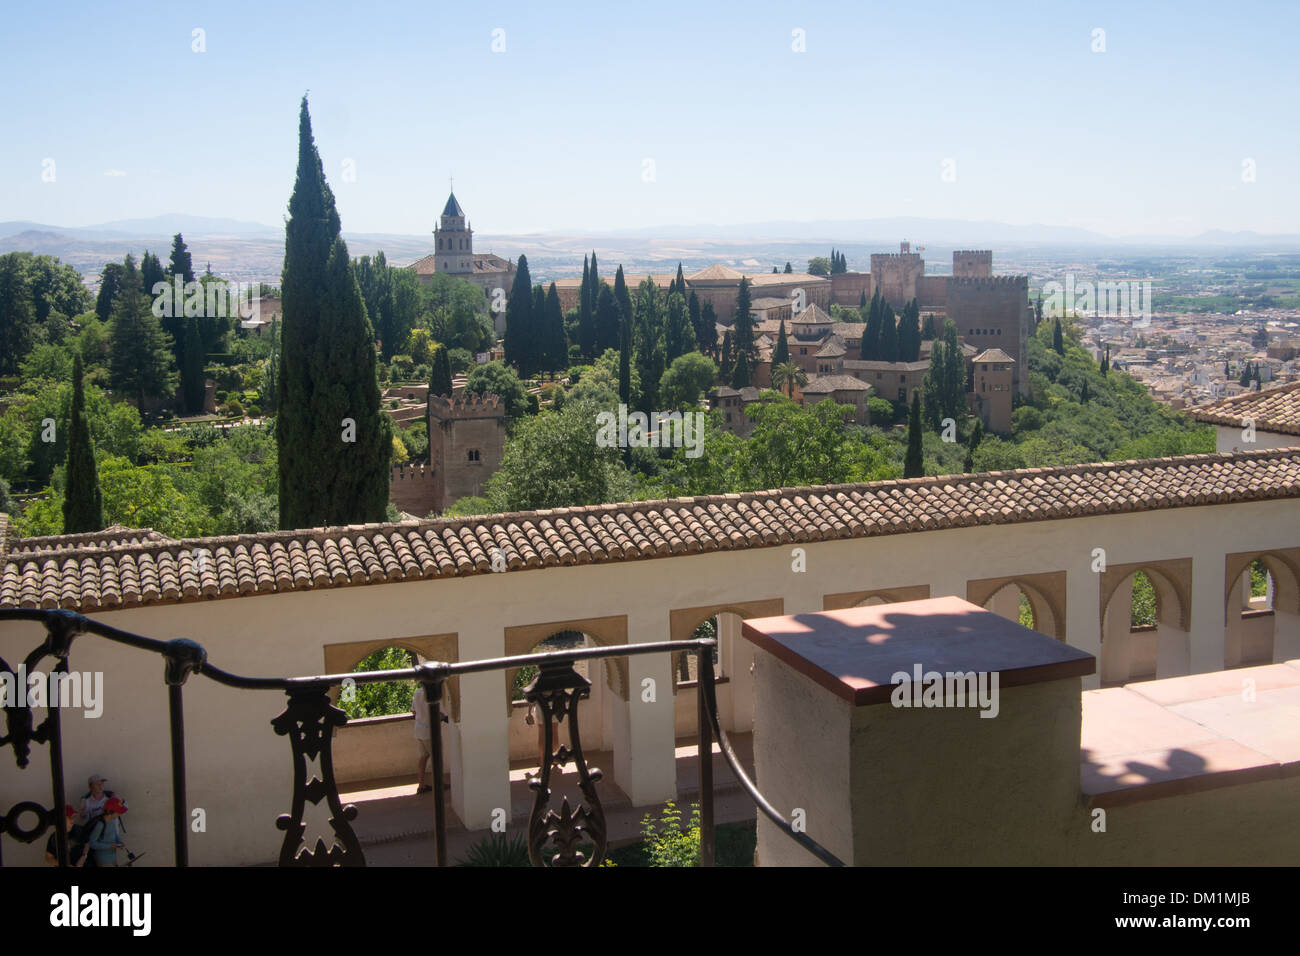 View from the Palacio de Generalife within the Alhambra towards the main fort and palace areas, Granada, Andalucia, Spain Stock Photo